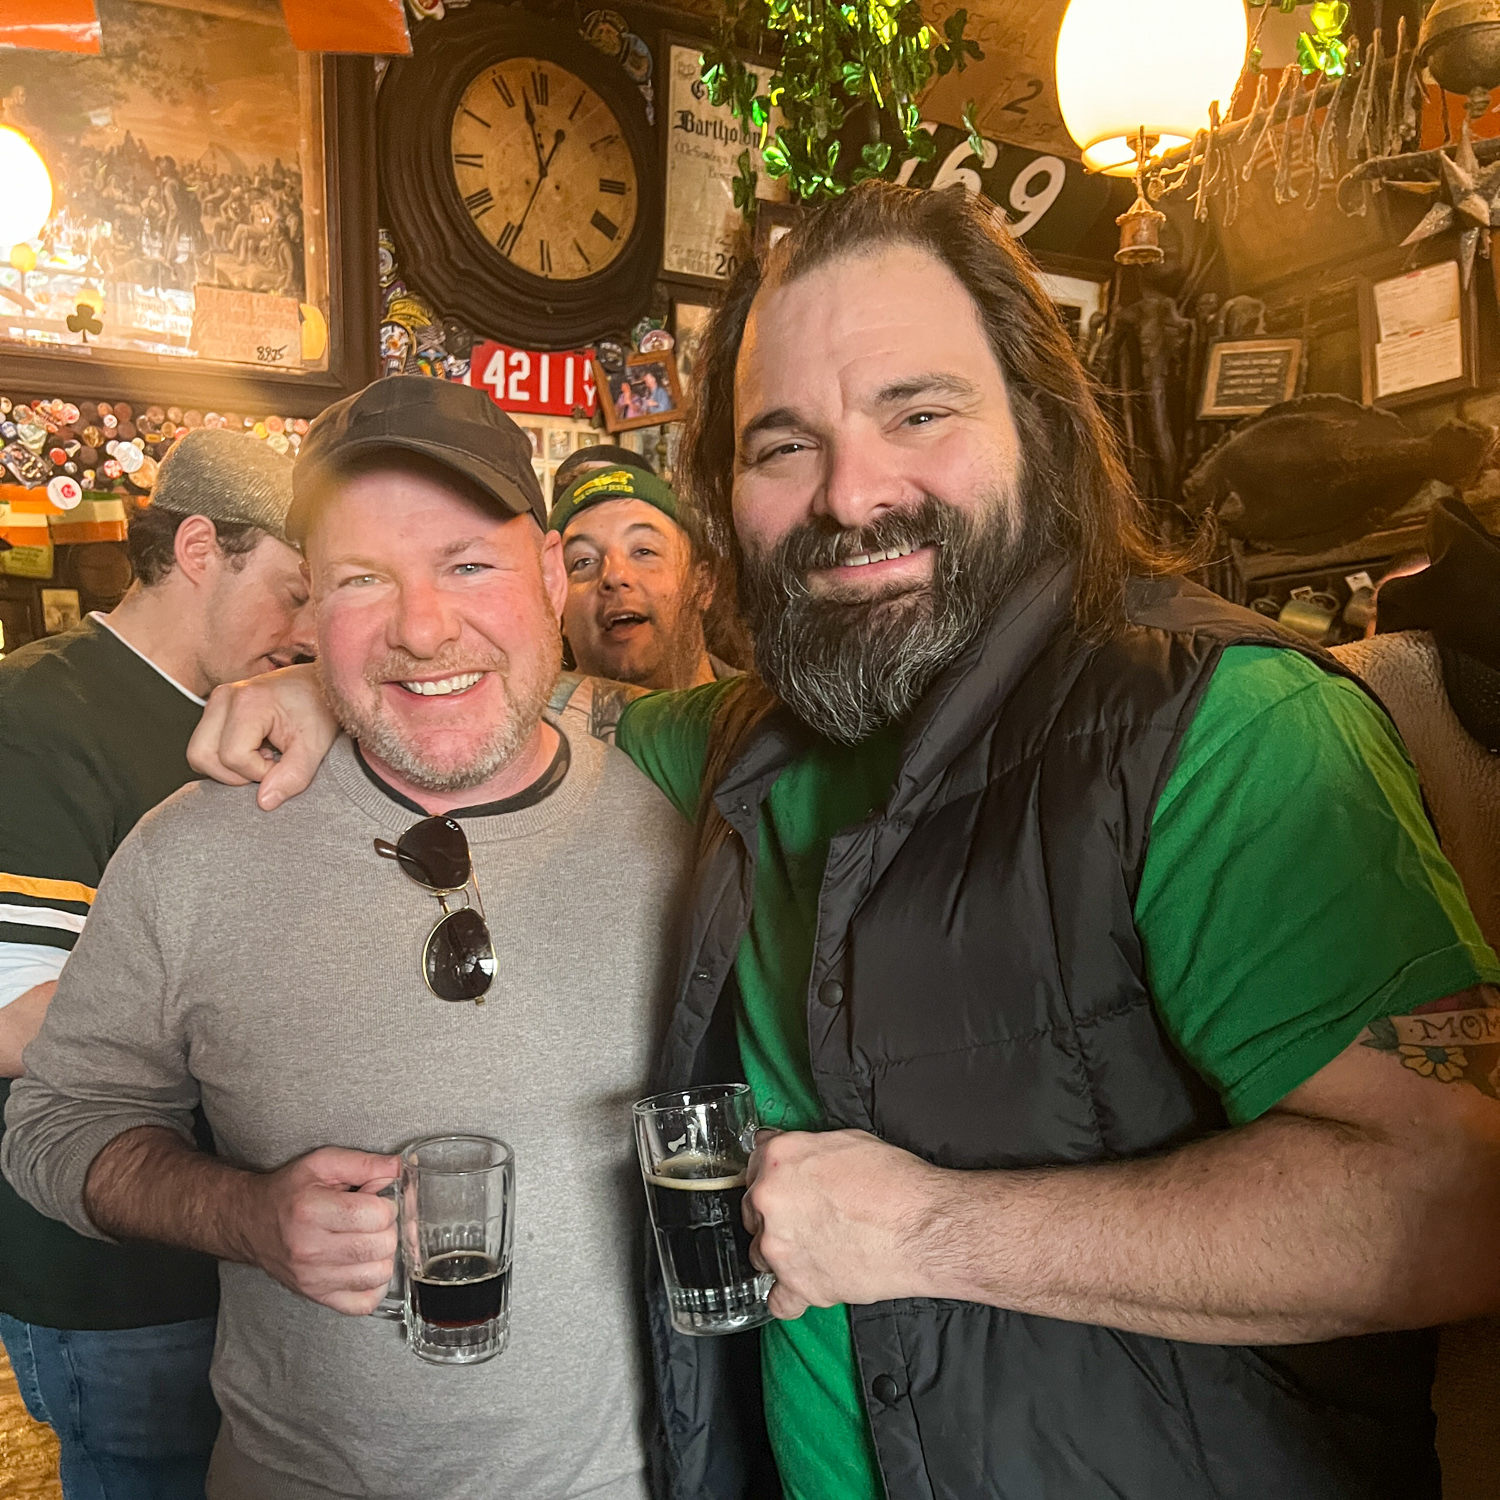 Celebrating St. Patrick's Day with my brother Jon at McSorley's in NYC